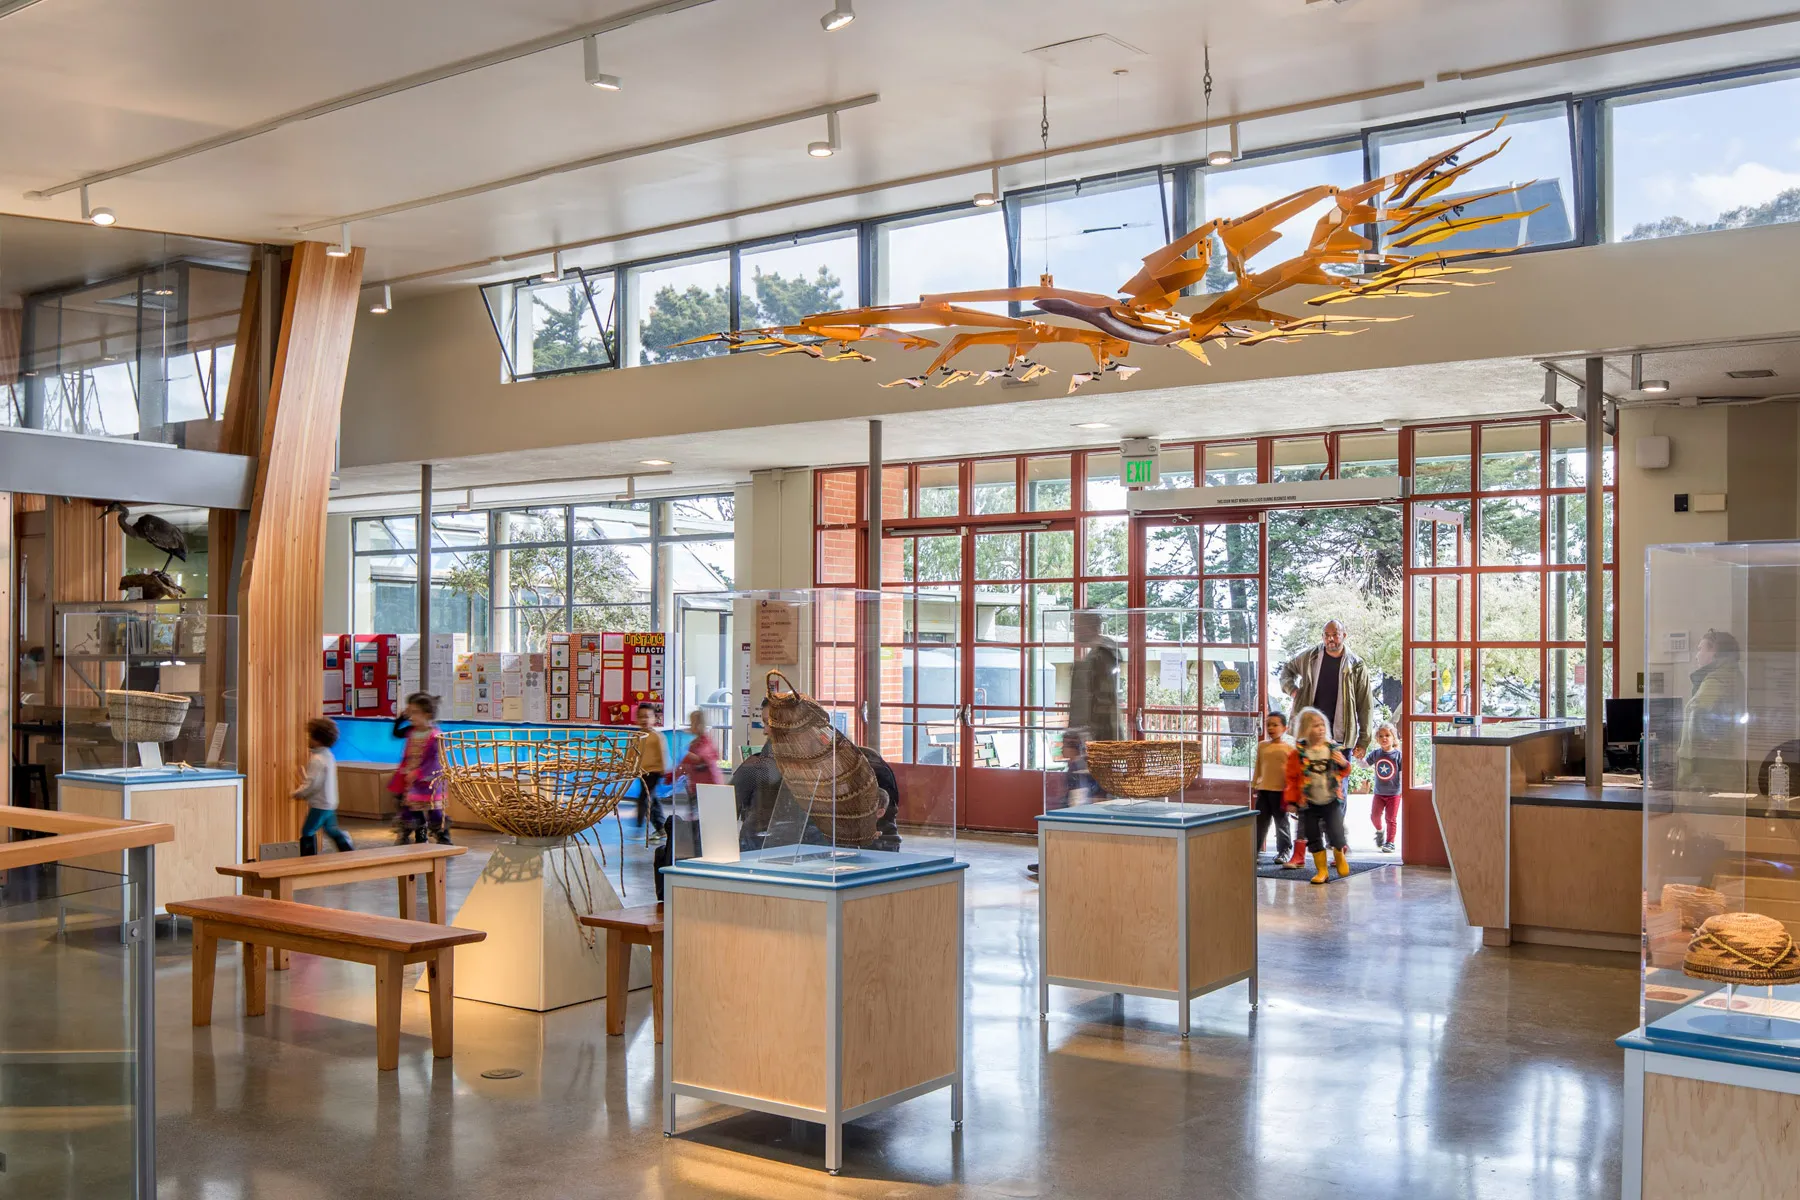 Randall Museum Lobby Featuring Science Displays and Visitors